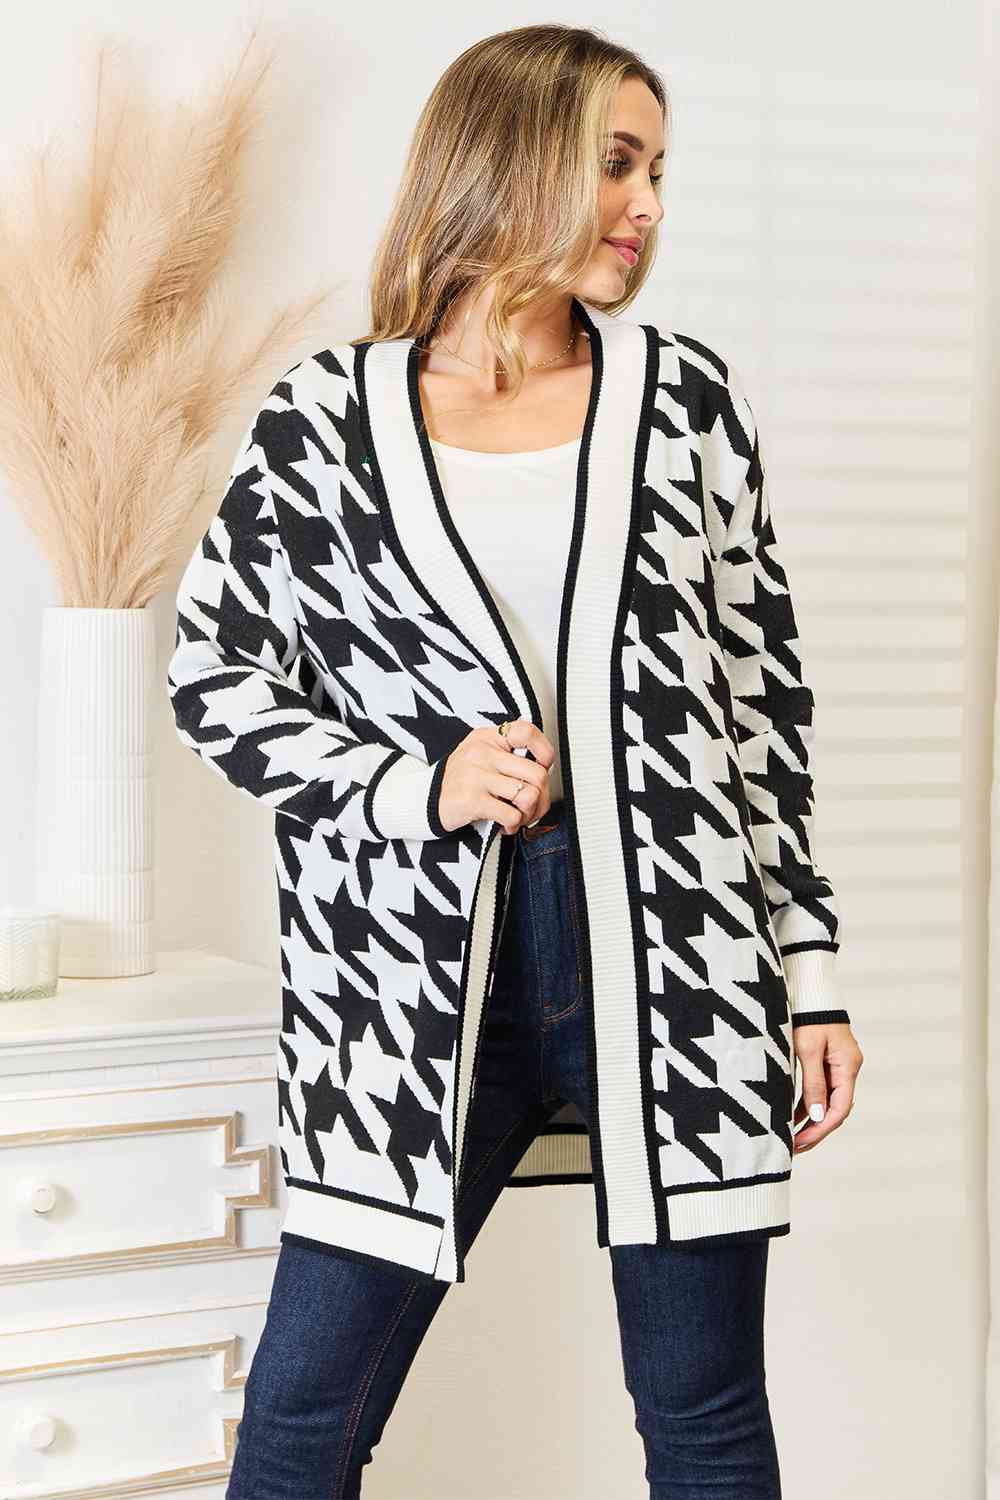 Woven Right Houndstooth Open Front Cardigan